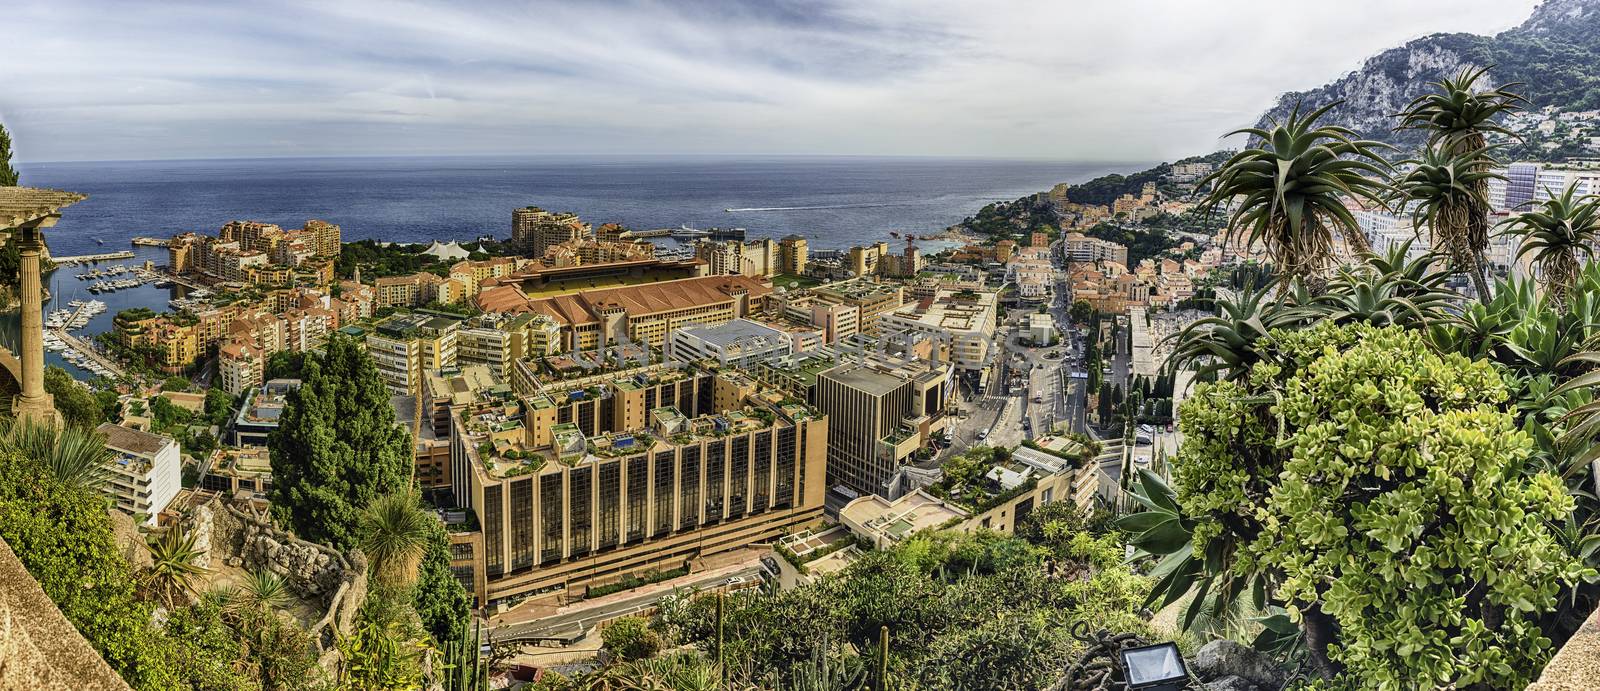 Panoramic view of Fontvieille district in the Principality of Mo by marcorubino